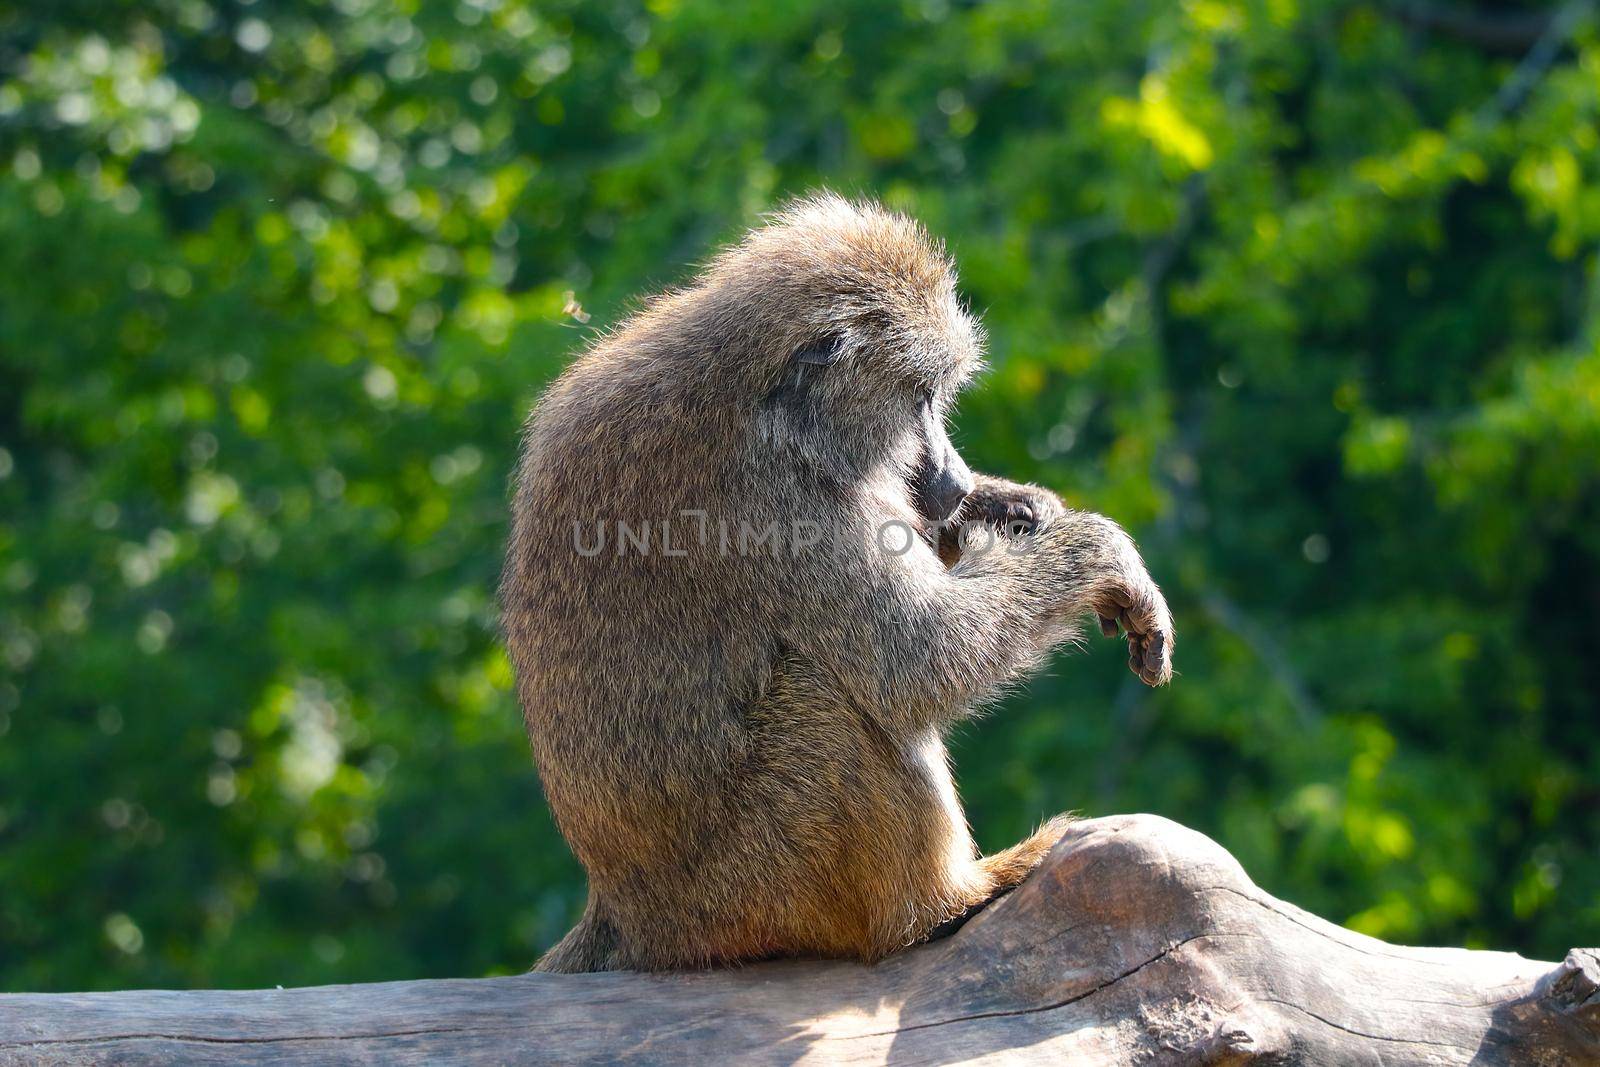 The macaque sits and cleans its fur. by kip02kas